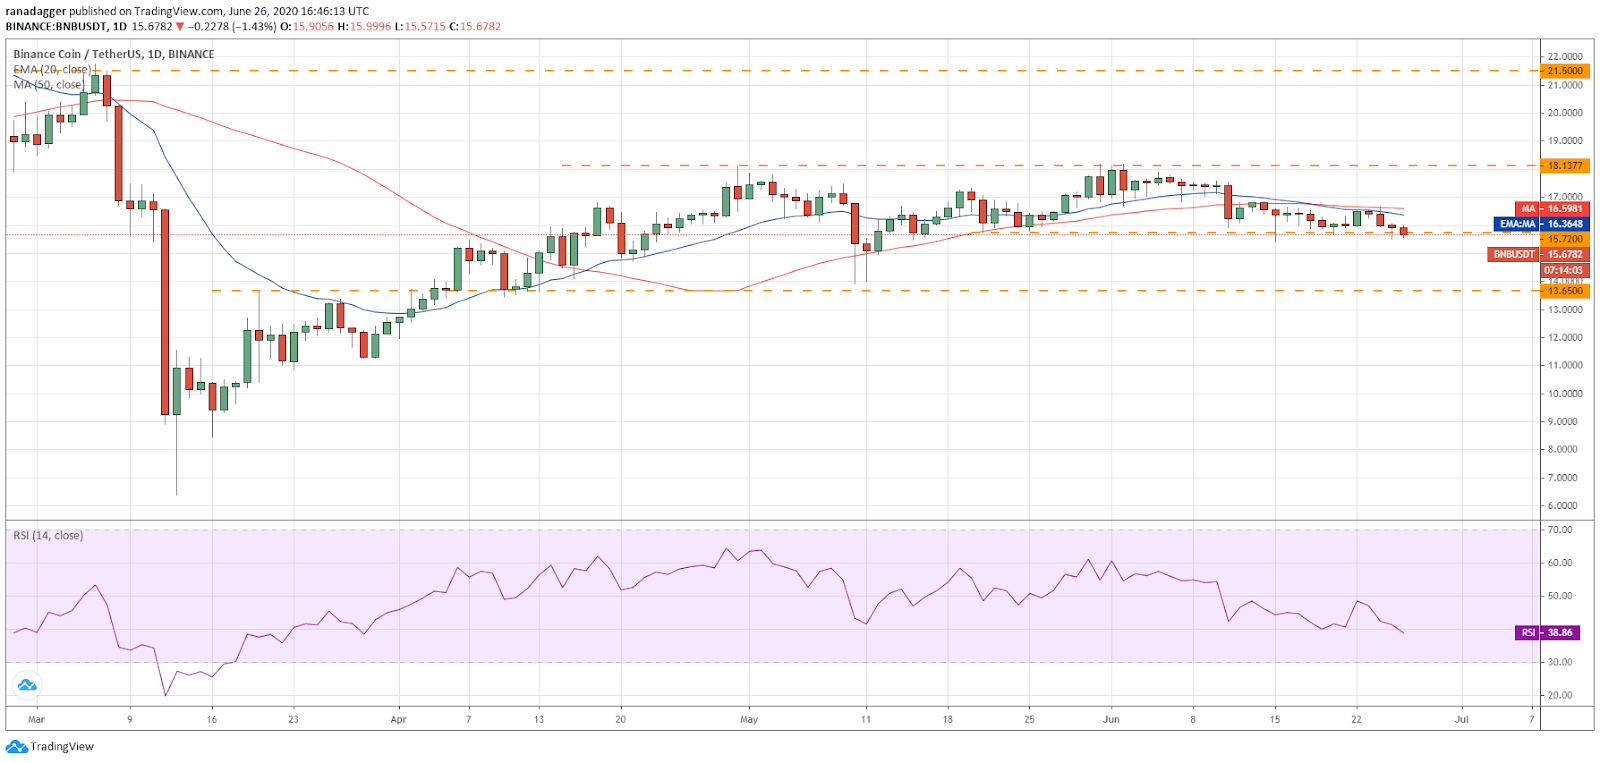 BNB/USD daily chart. Source: Tradingview​​​​​​​